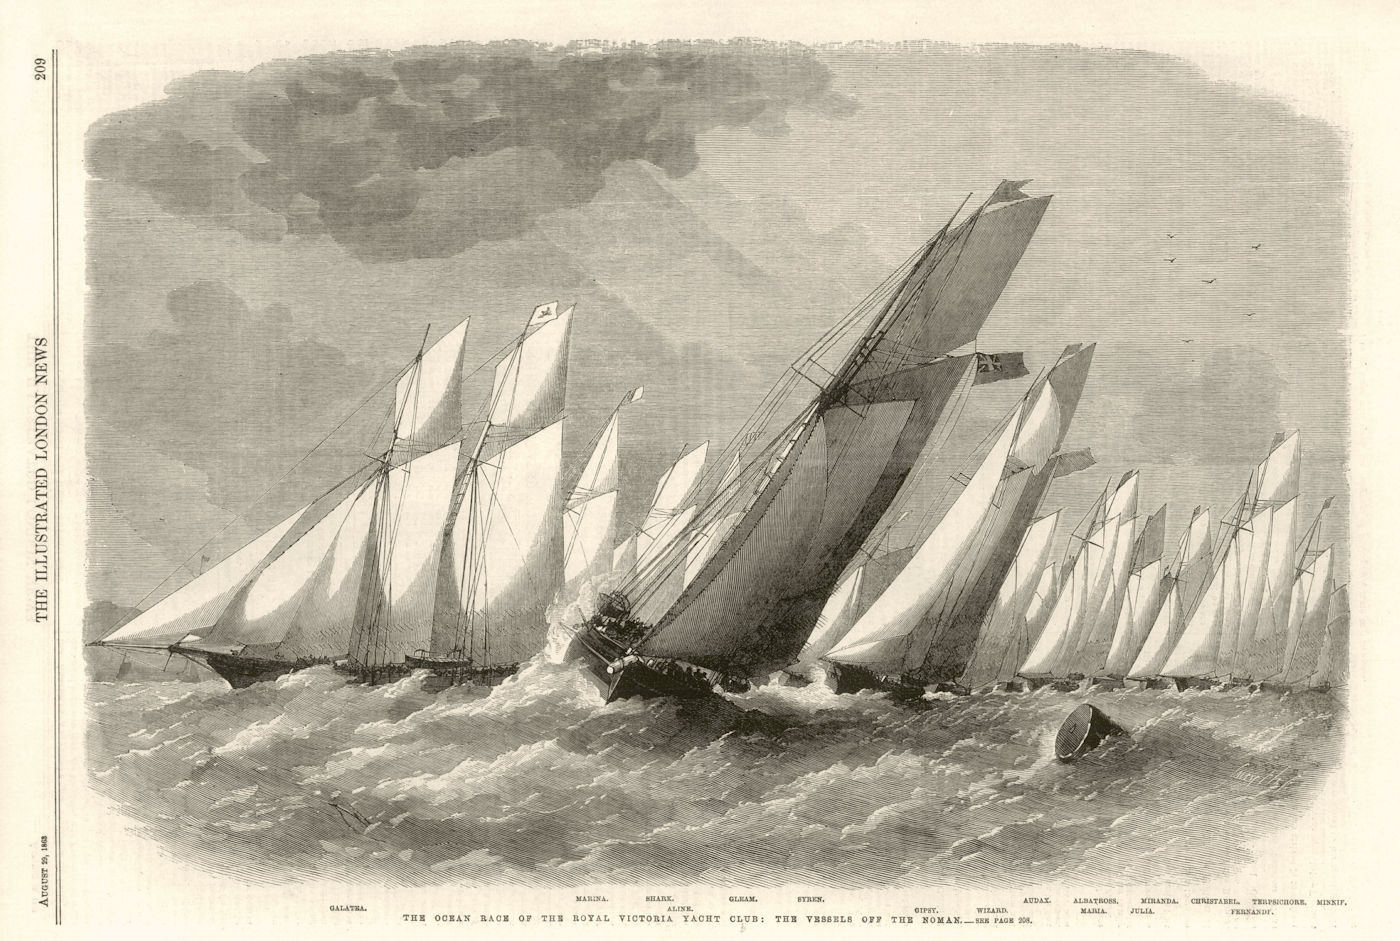 Royal Victoria Yacht club ocean race. Vessels off the Noman. Isle of Wight 1863